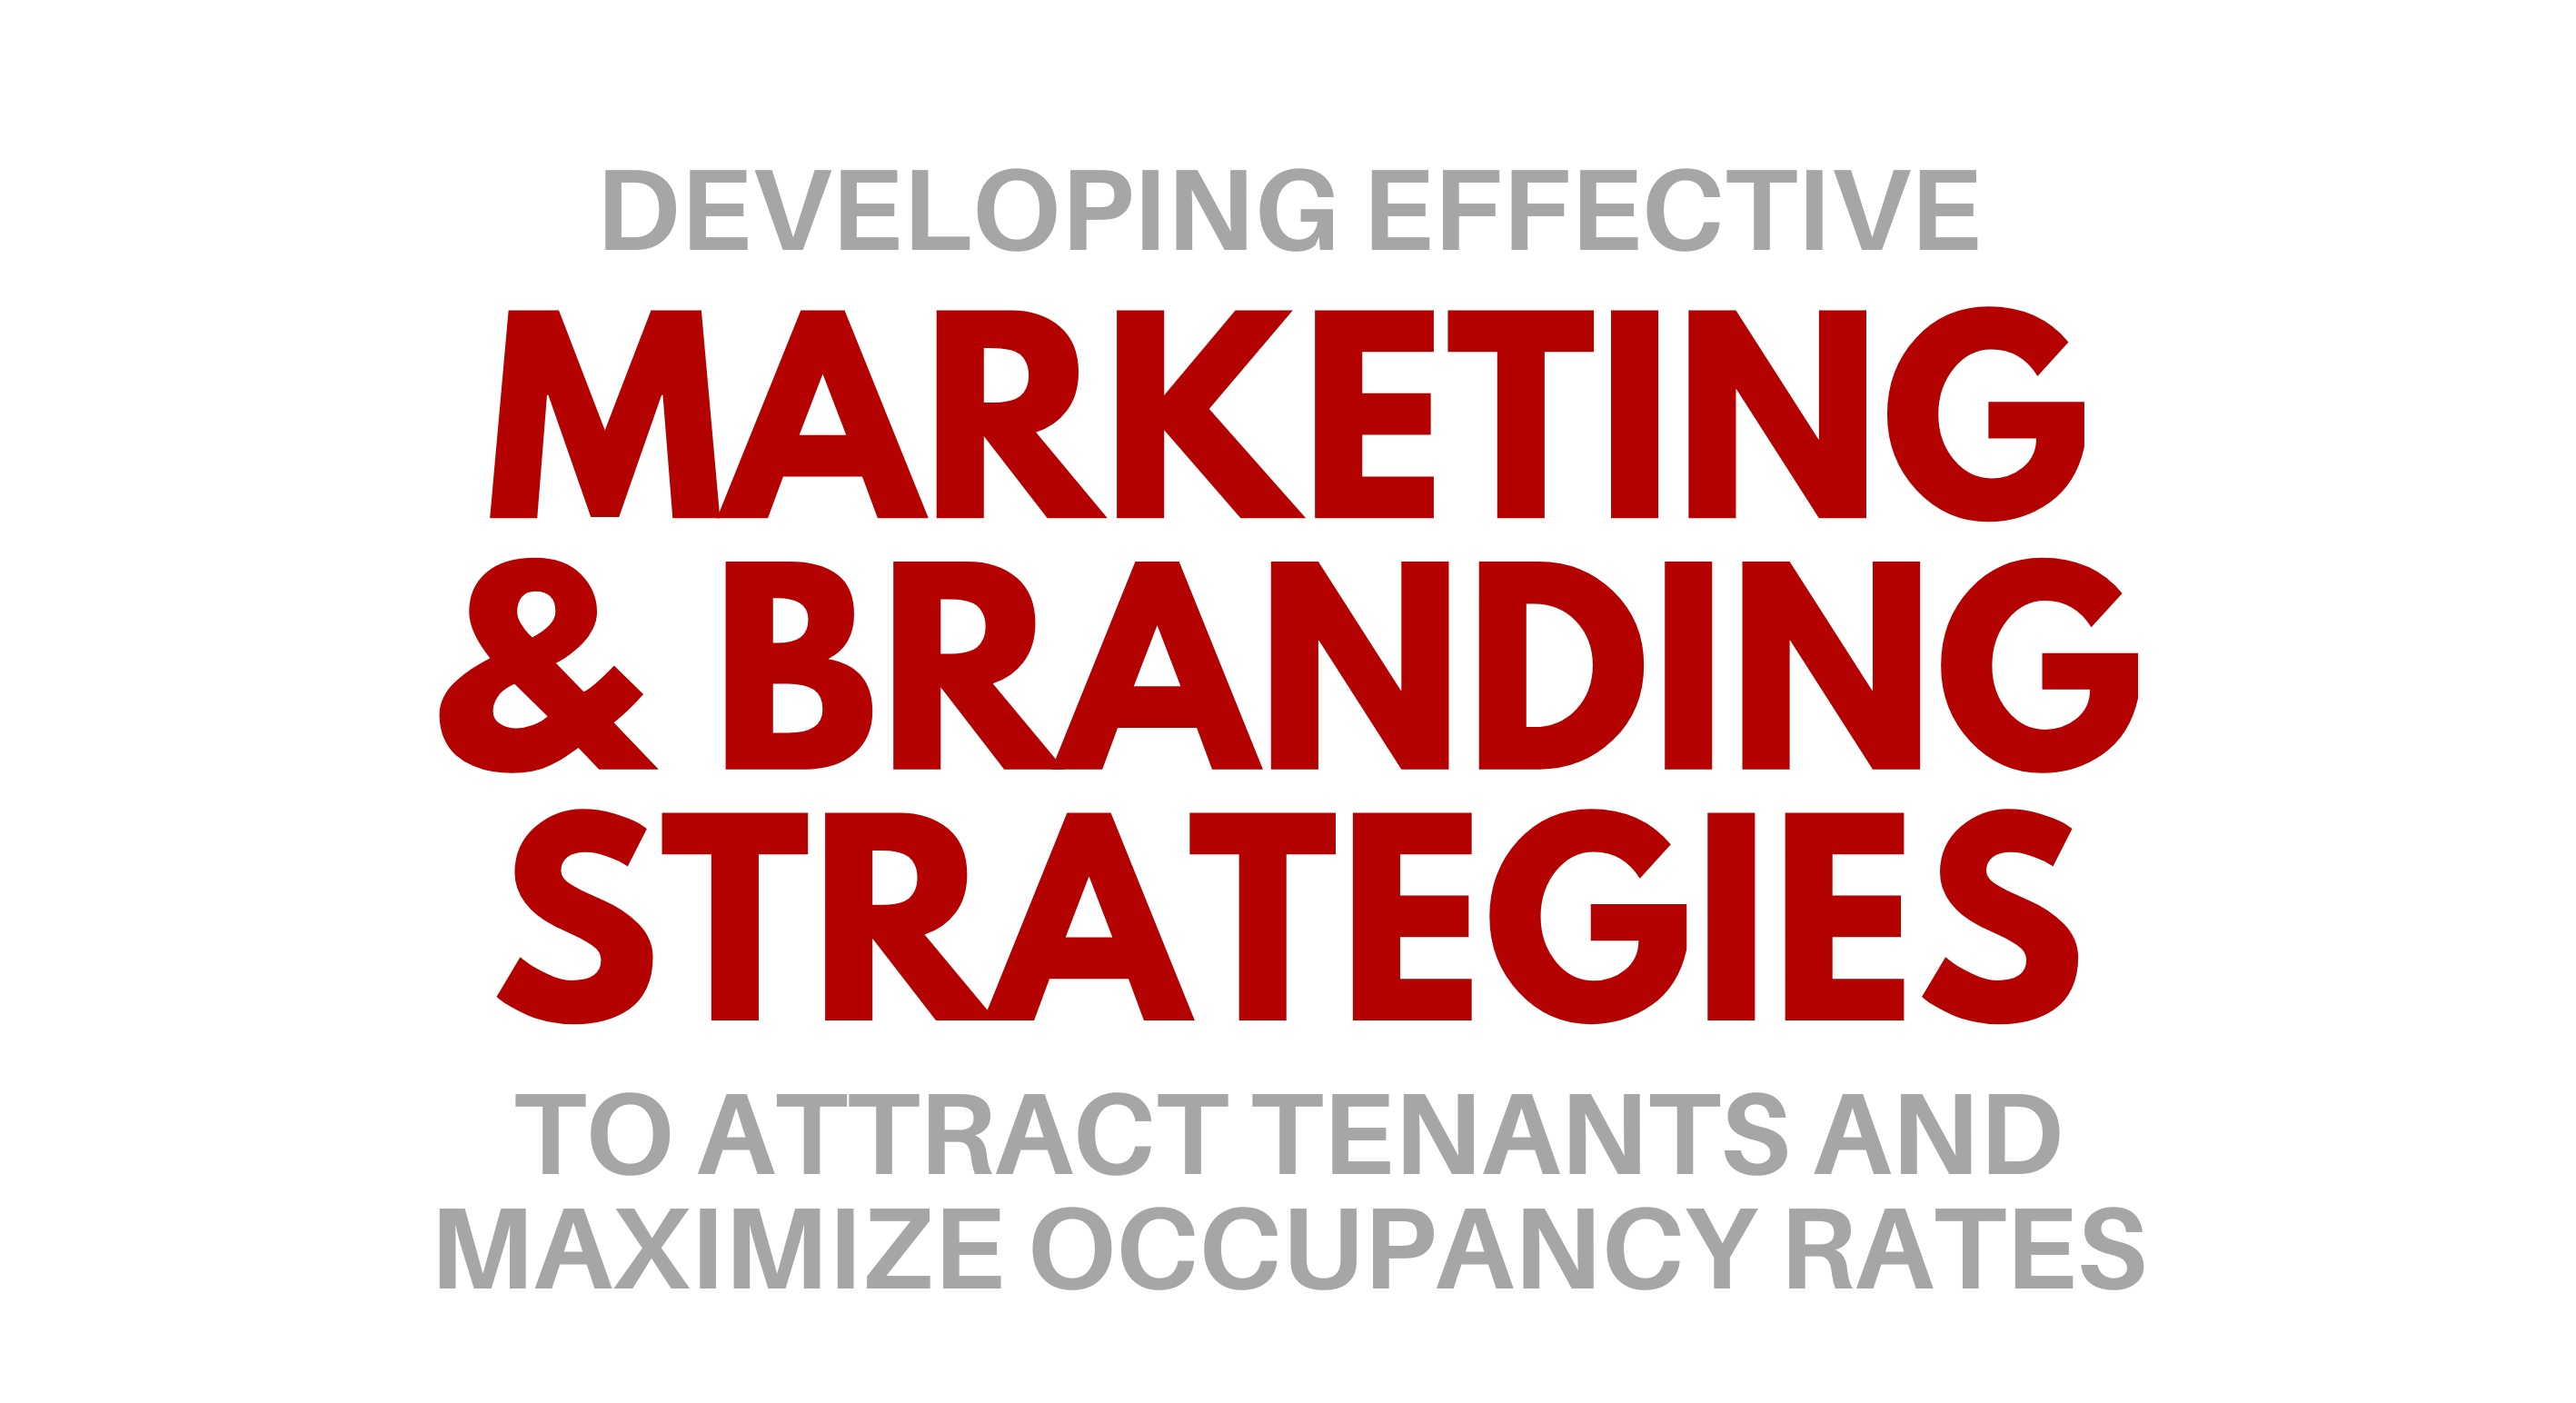 Developing Effective Marketing and Branding Strategies to Attract Tenants and Maximize Occupancy Rates in Commercial Properties